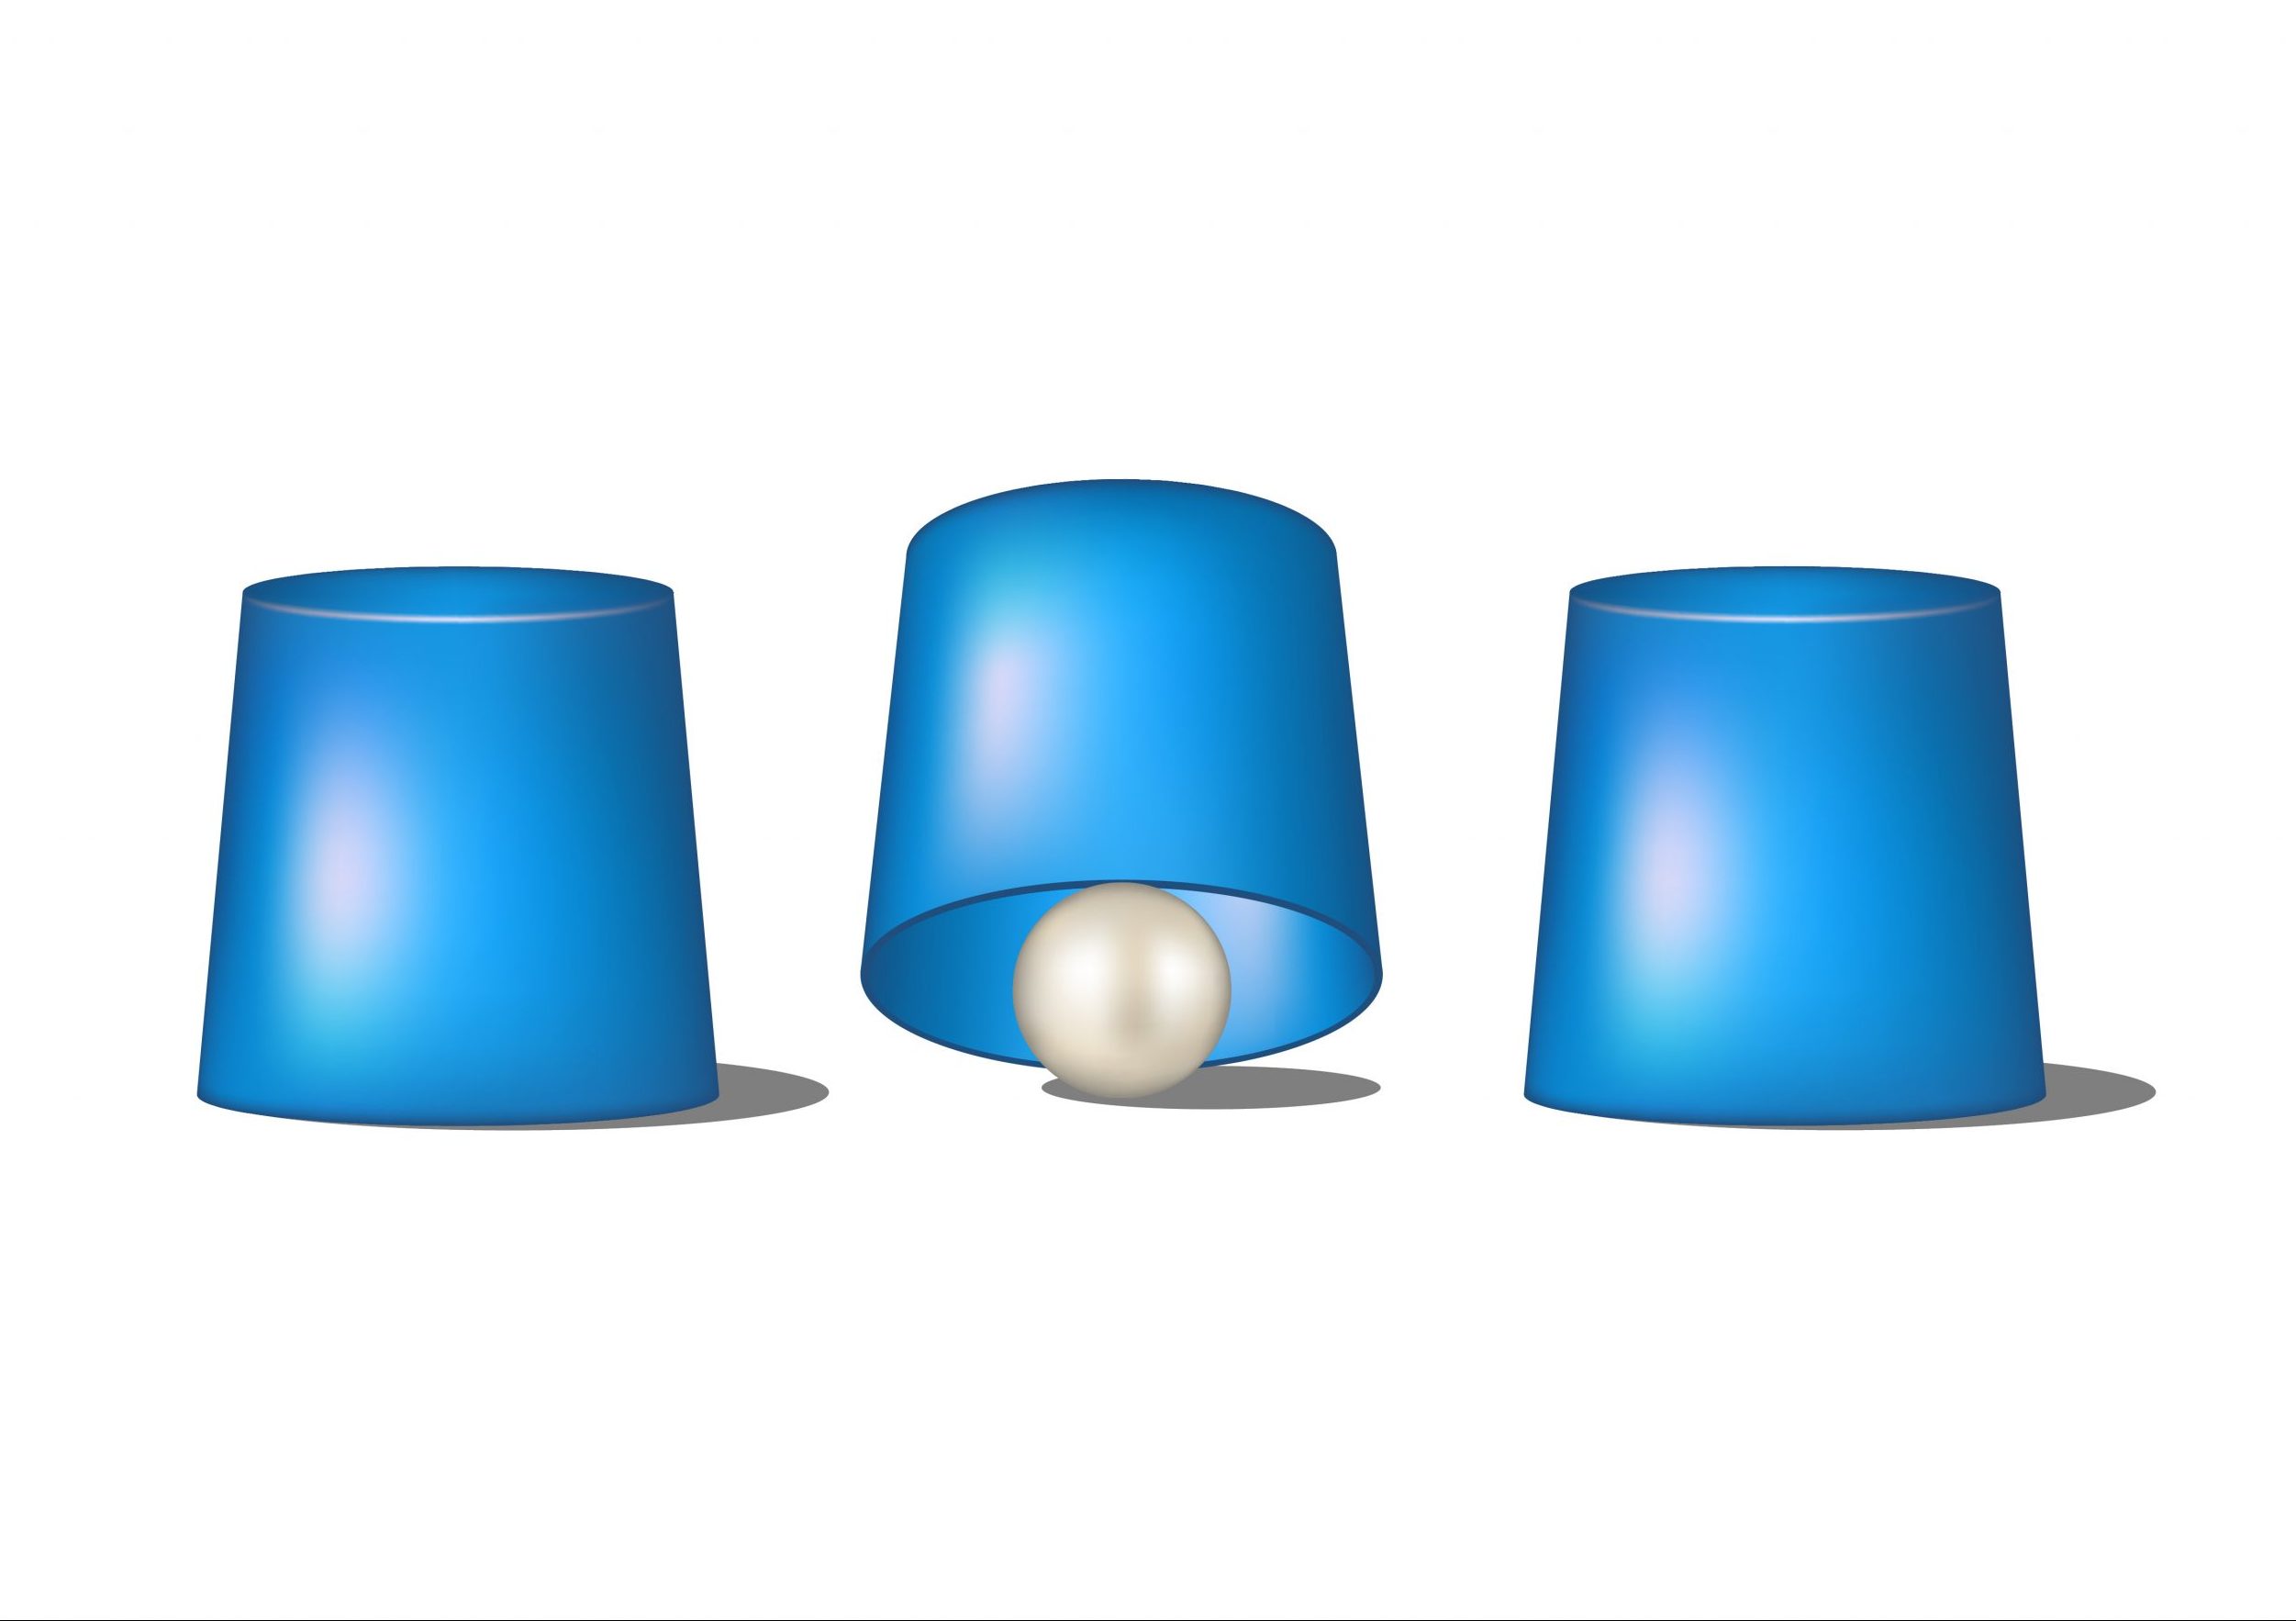 Three thimbles, with a ball barely visible under one of them.